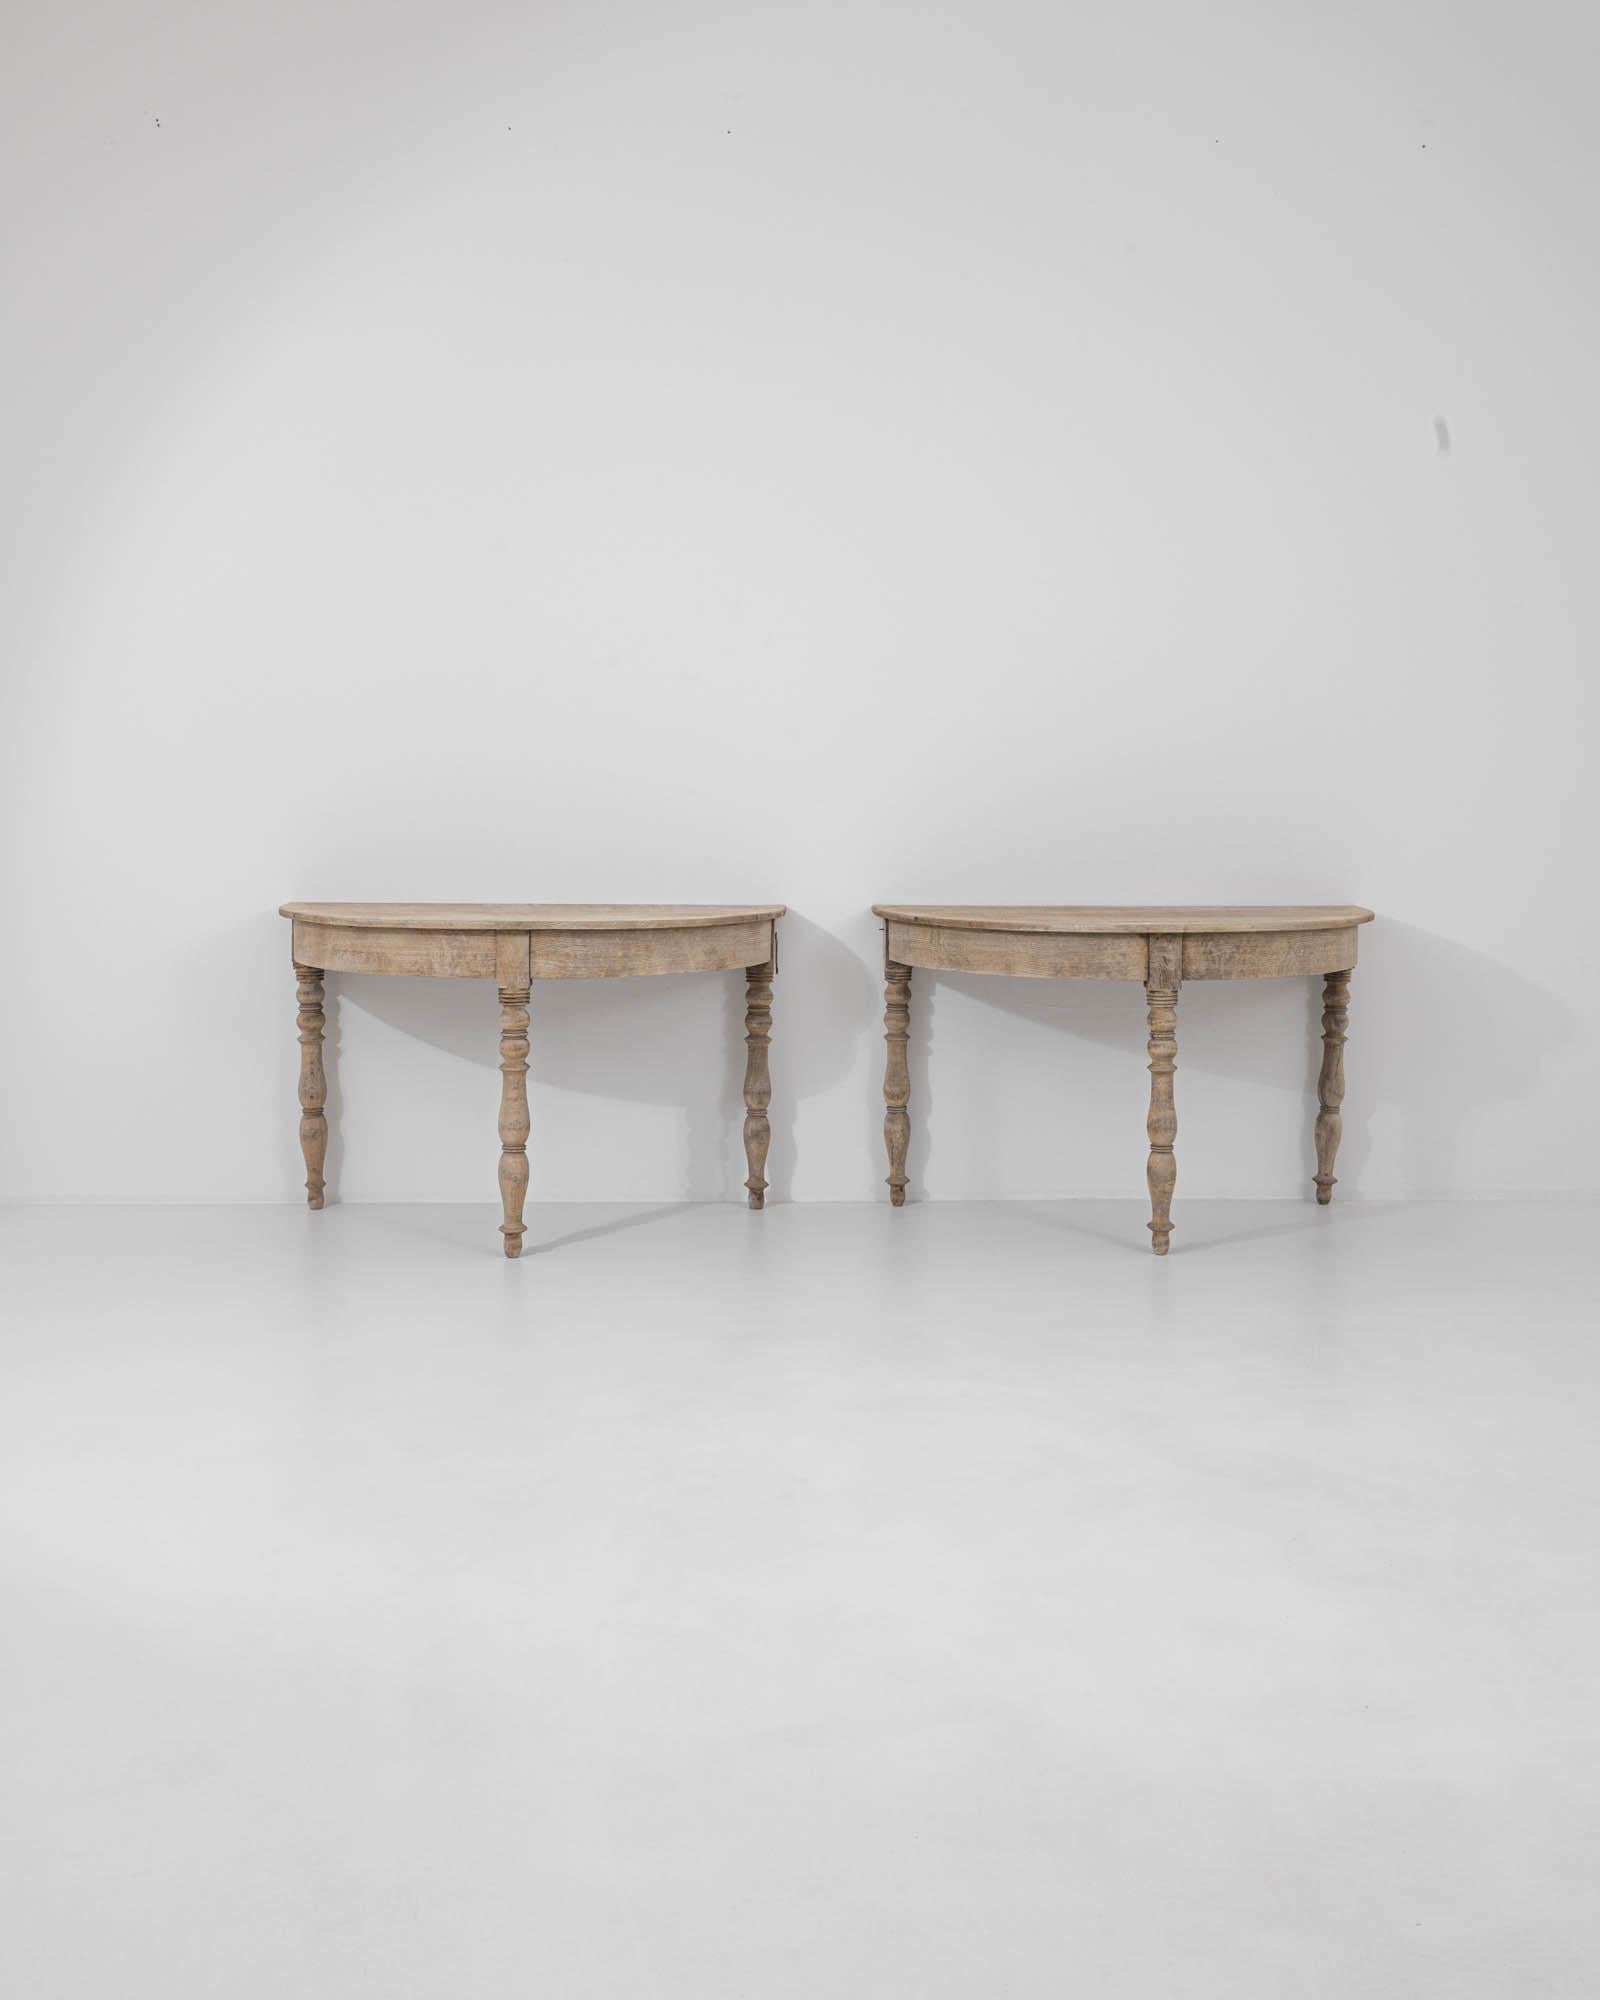 Versatile and refined, this pair of console tables in natural oak provide an elegant vintage accent. Built in France at the turn of the century, the astute design allows the semi-circular tables to be stationed independently or placed together to